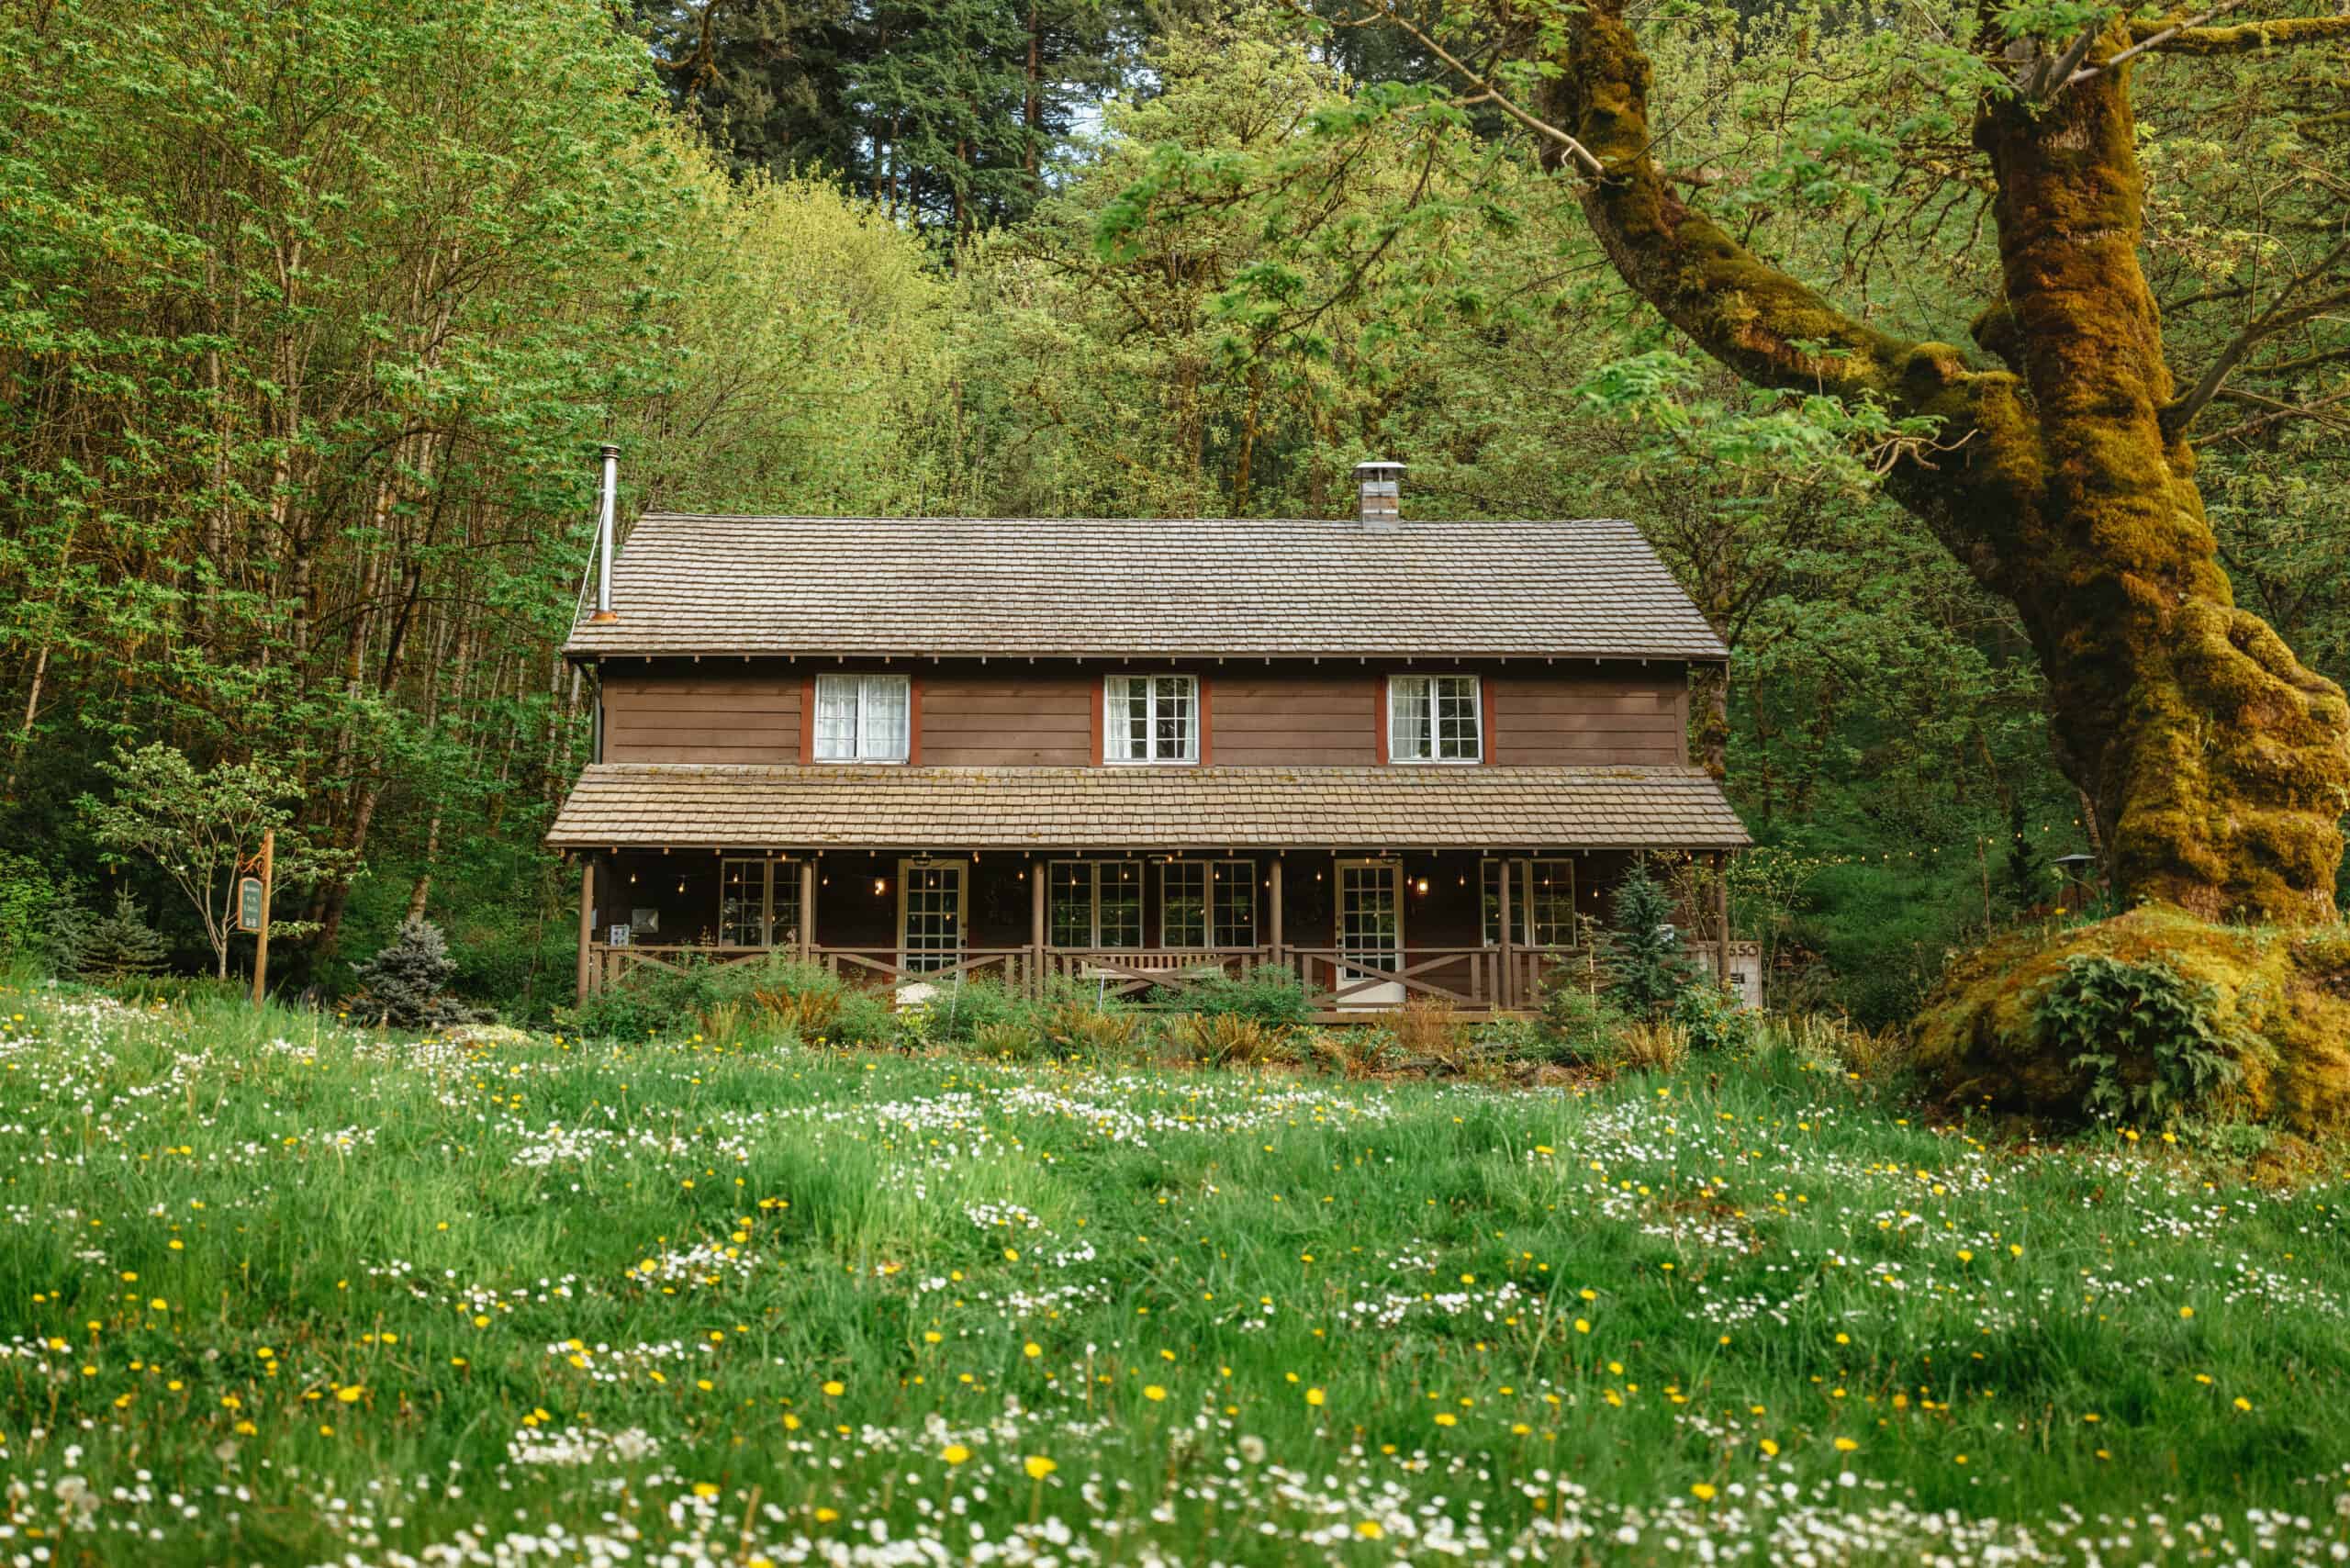 Bridal Veil Falls BnB - Places To Stay In The Columbia River Gorge